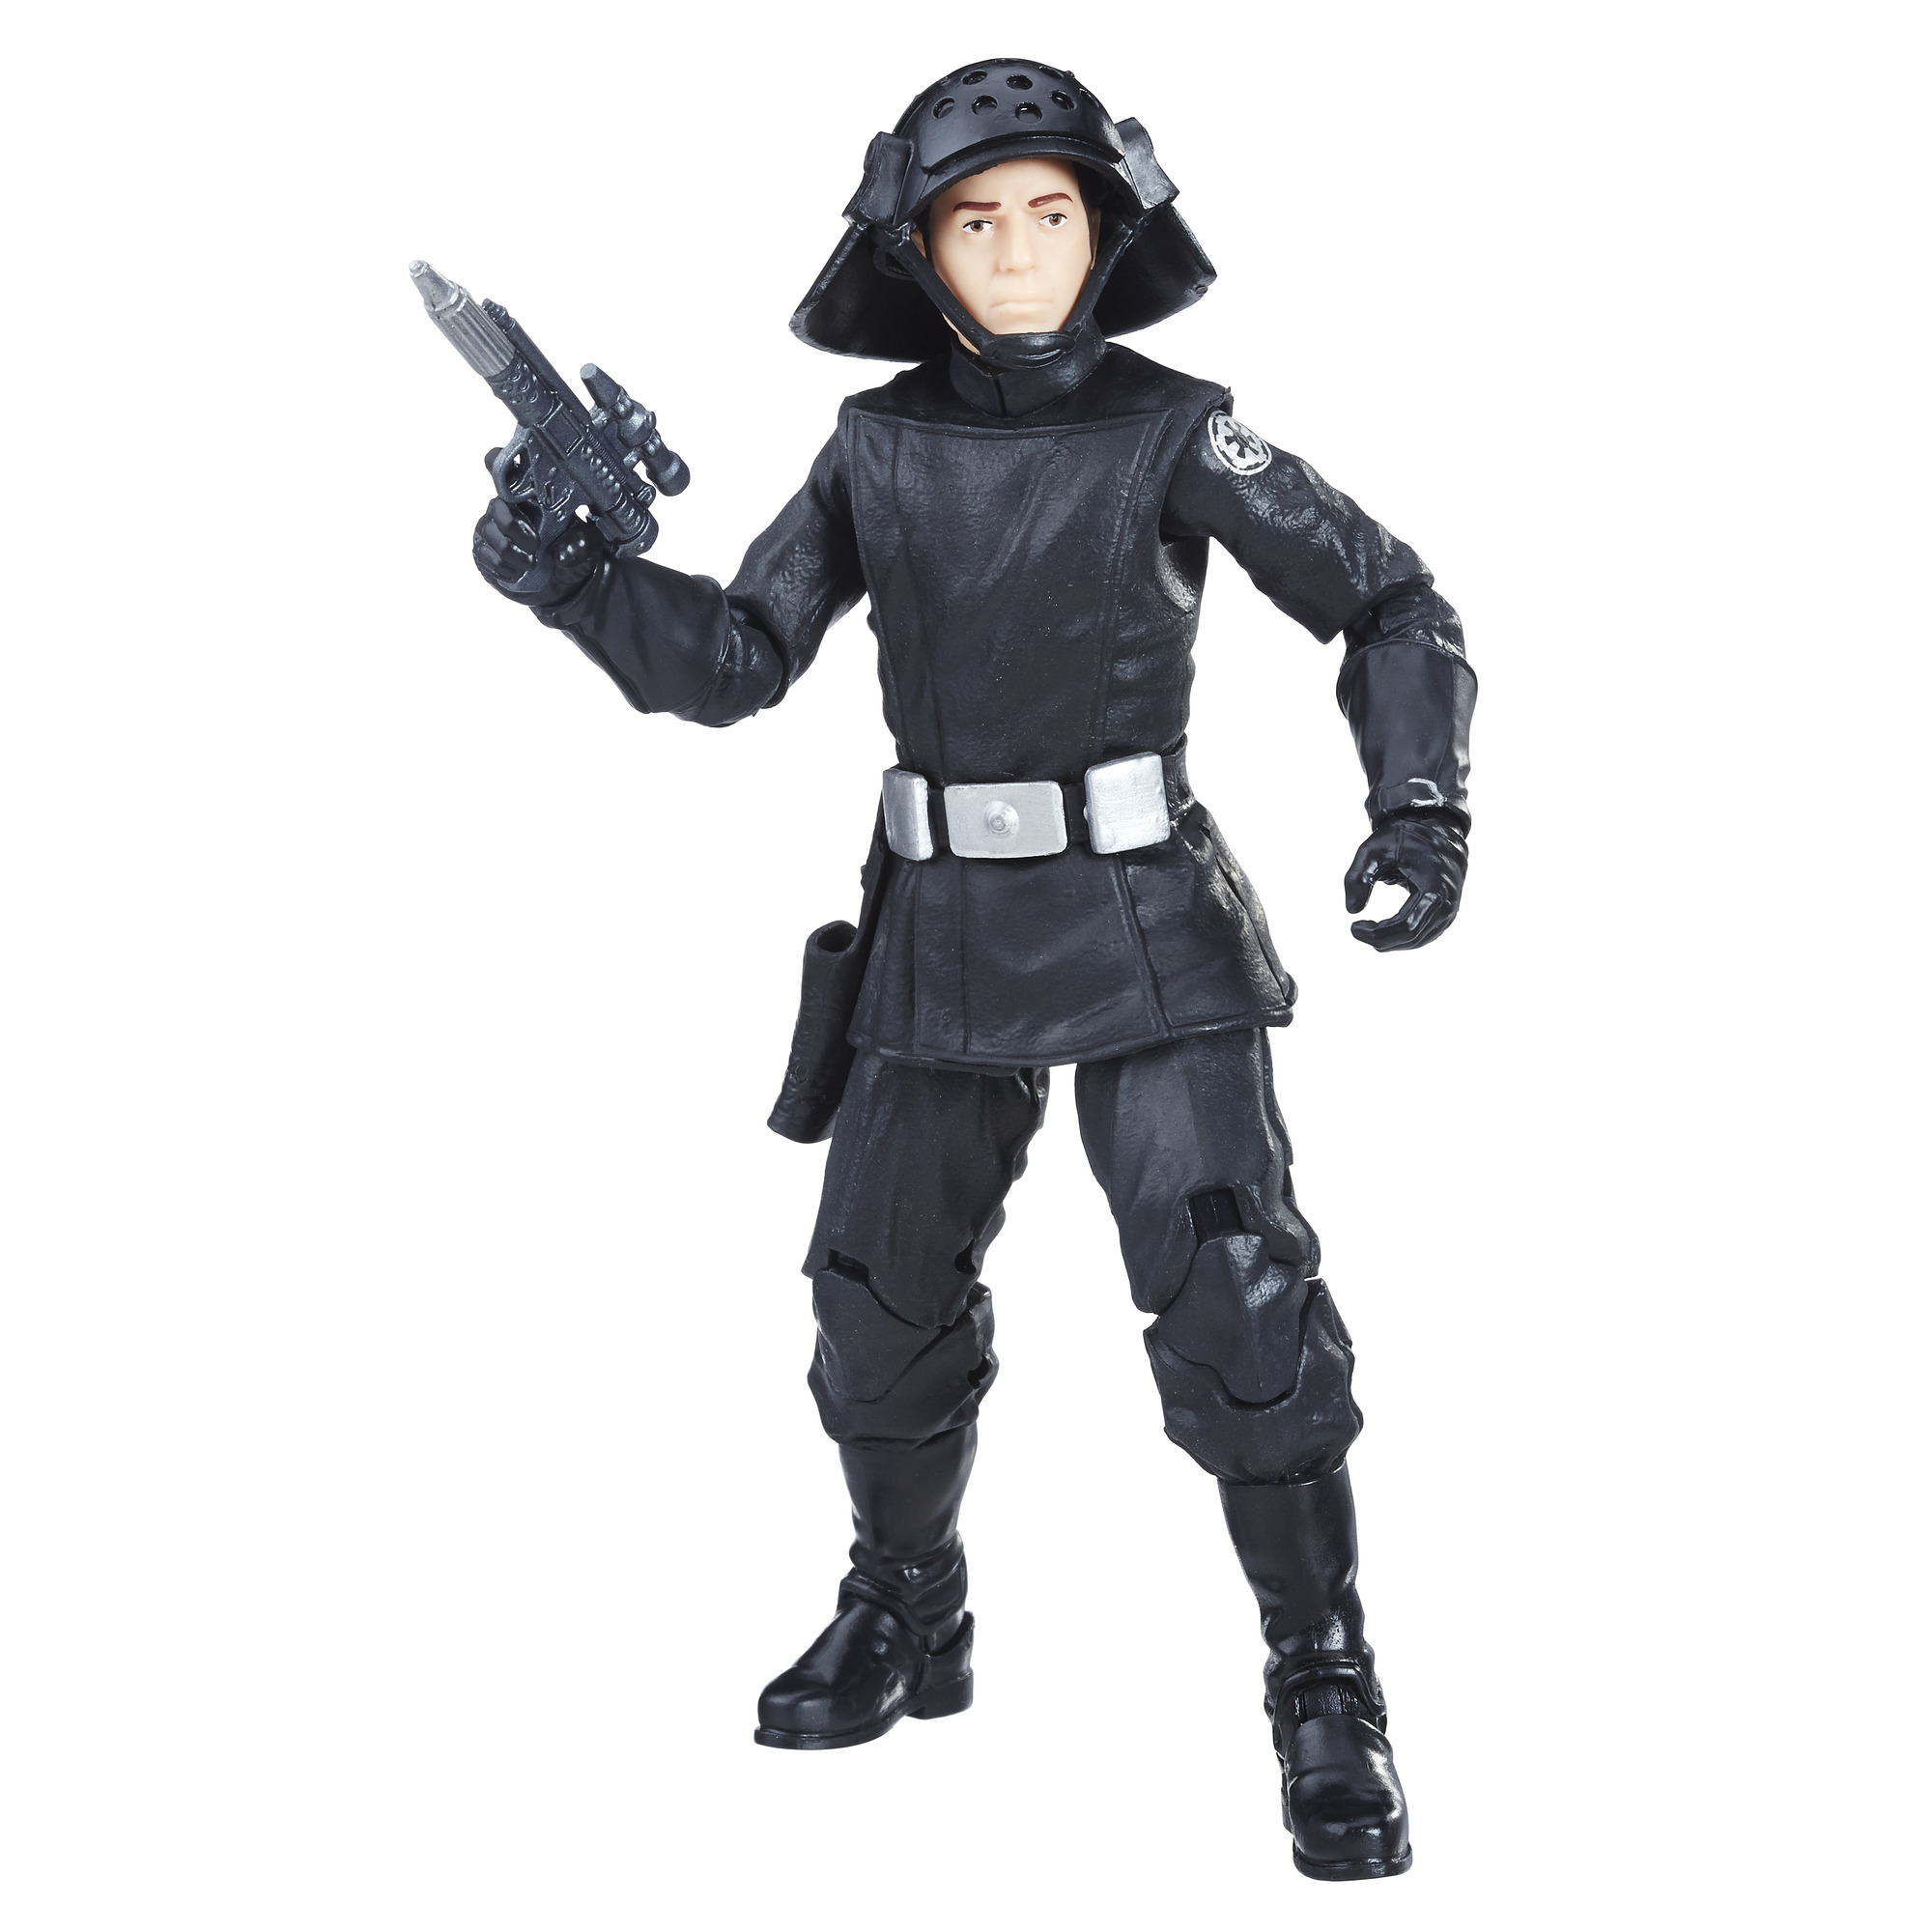 Star Wars The Black Series Death Squad Commander - image 1 of 3